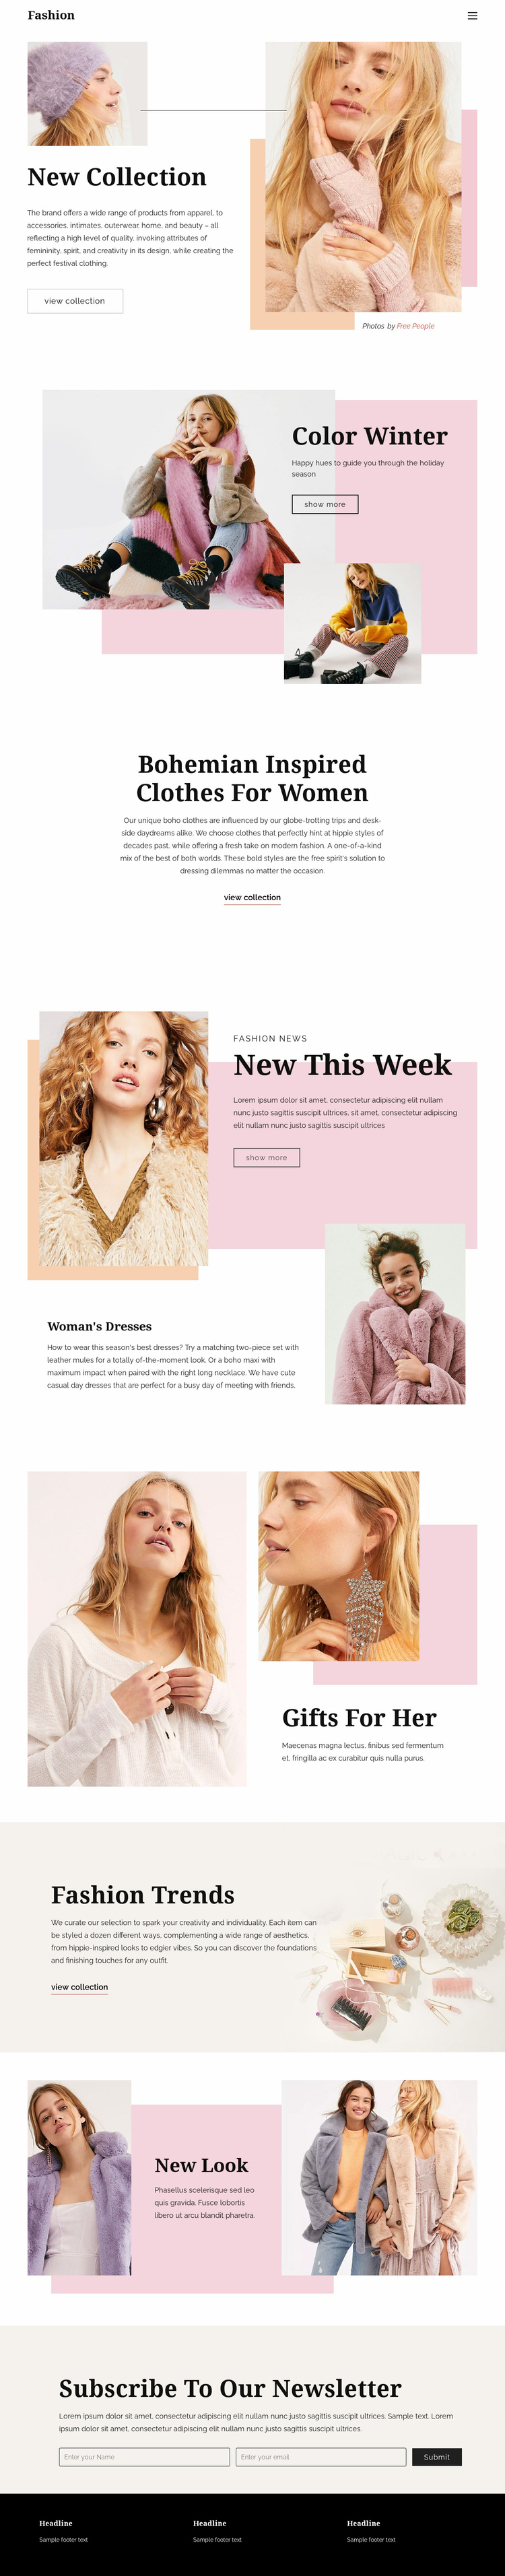 Fashion Page Design Website Template